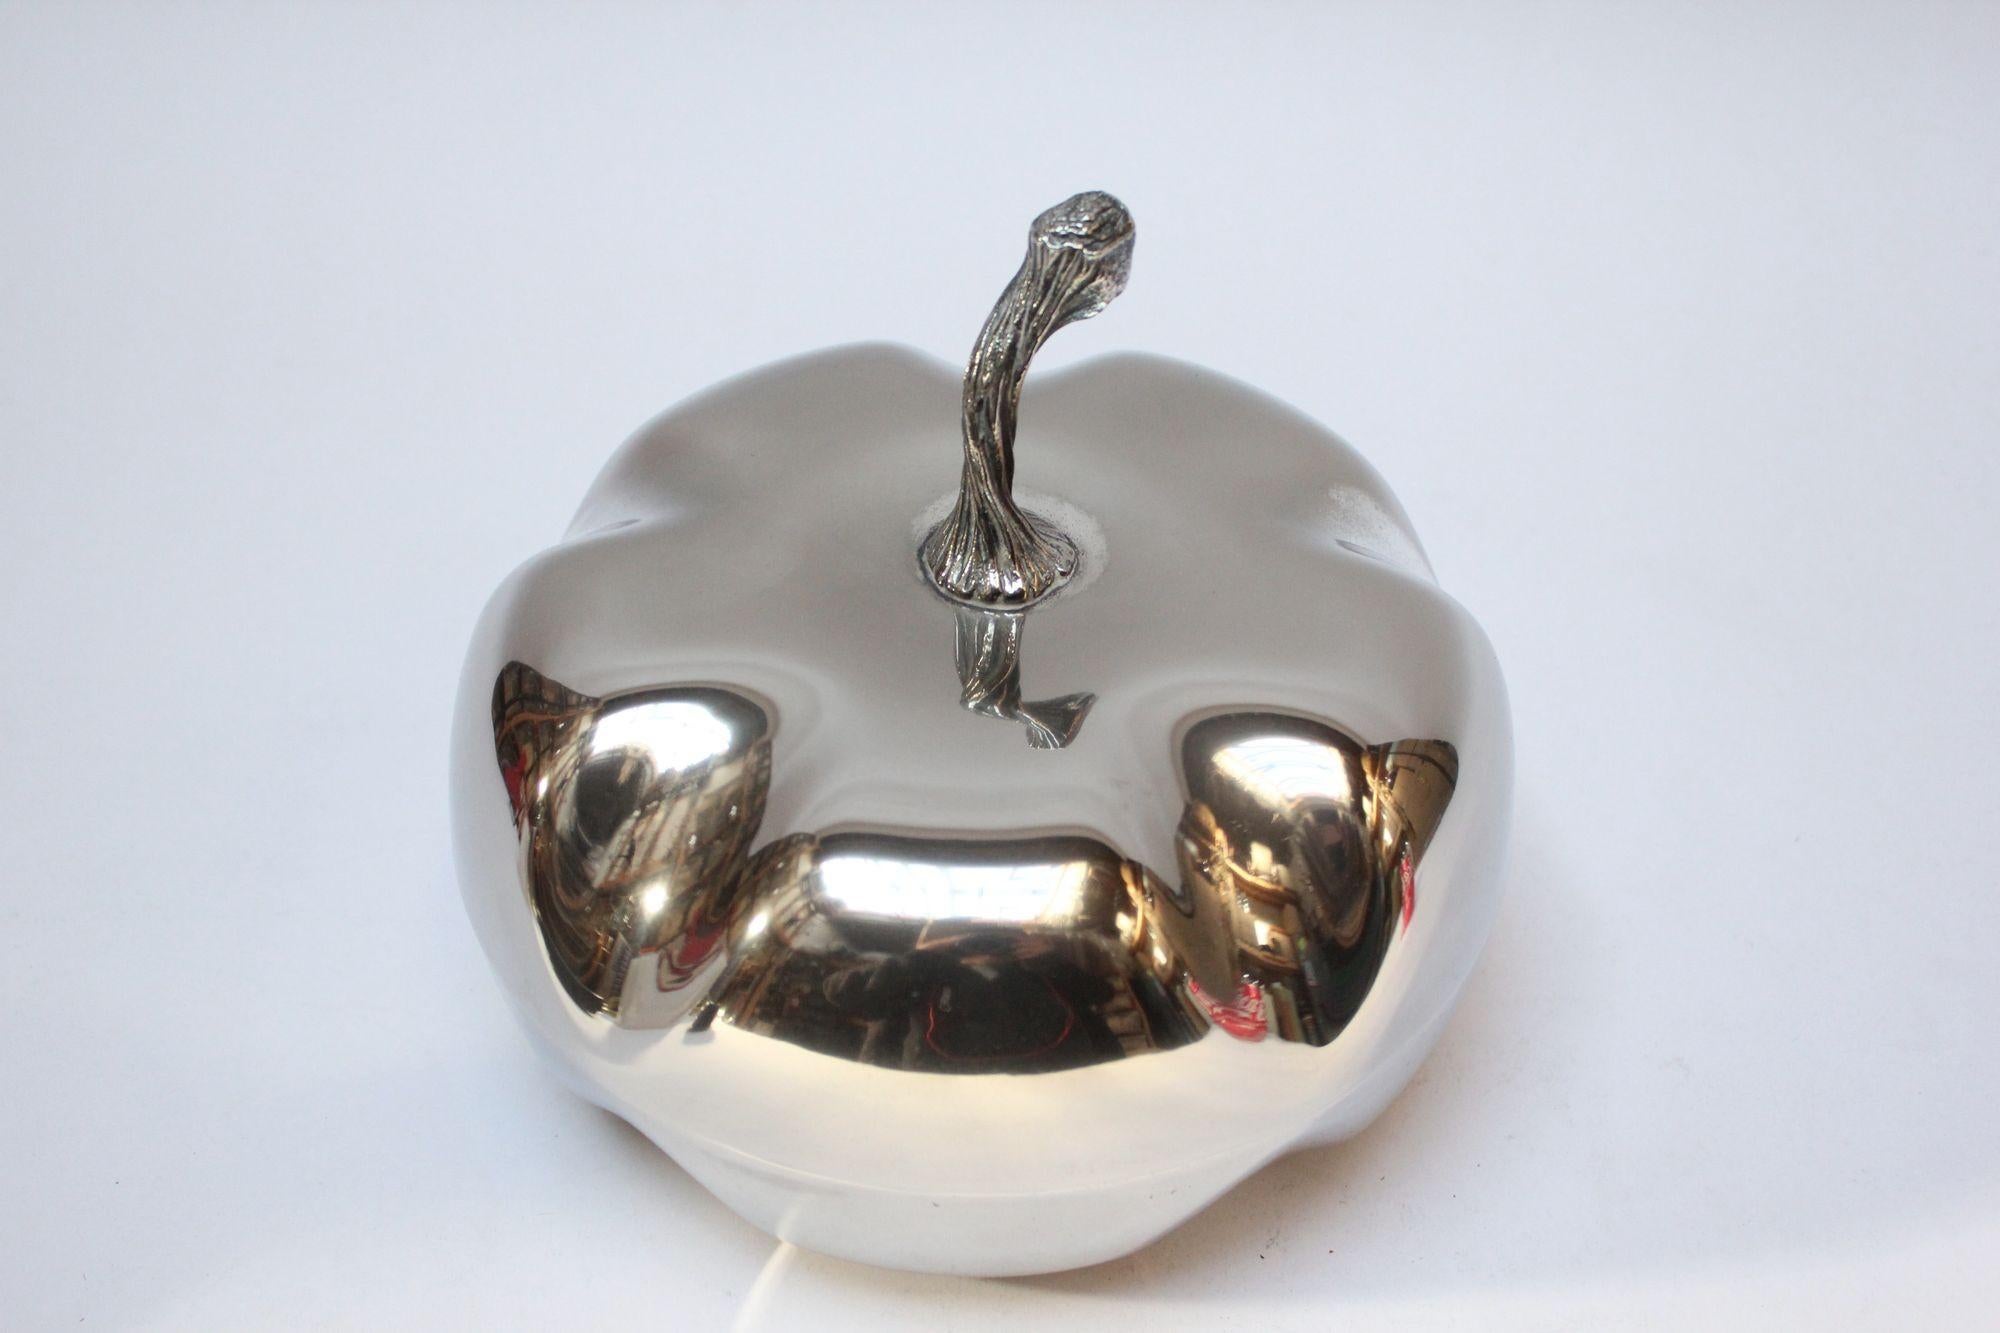 Mid-Century Italian Modern silver-plated snack/candy/serving dish with lidded top formed to resemble a squash.
This is a shorter, uninsulated version of fruit and vegetable-formed ice buckets made in Italy and France at the time.
Though shallow,